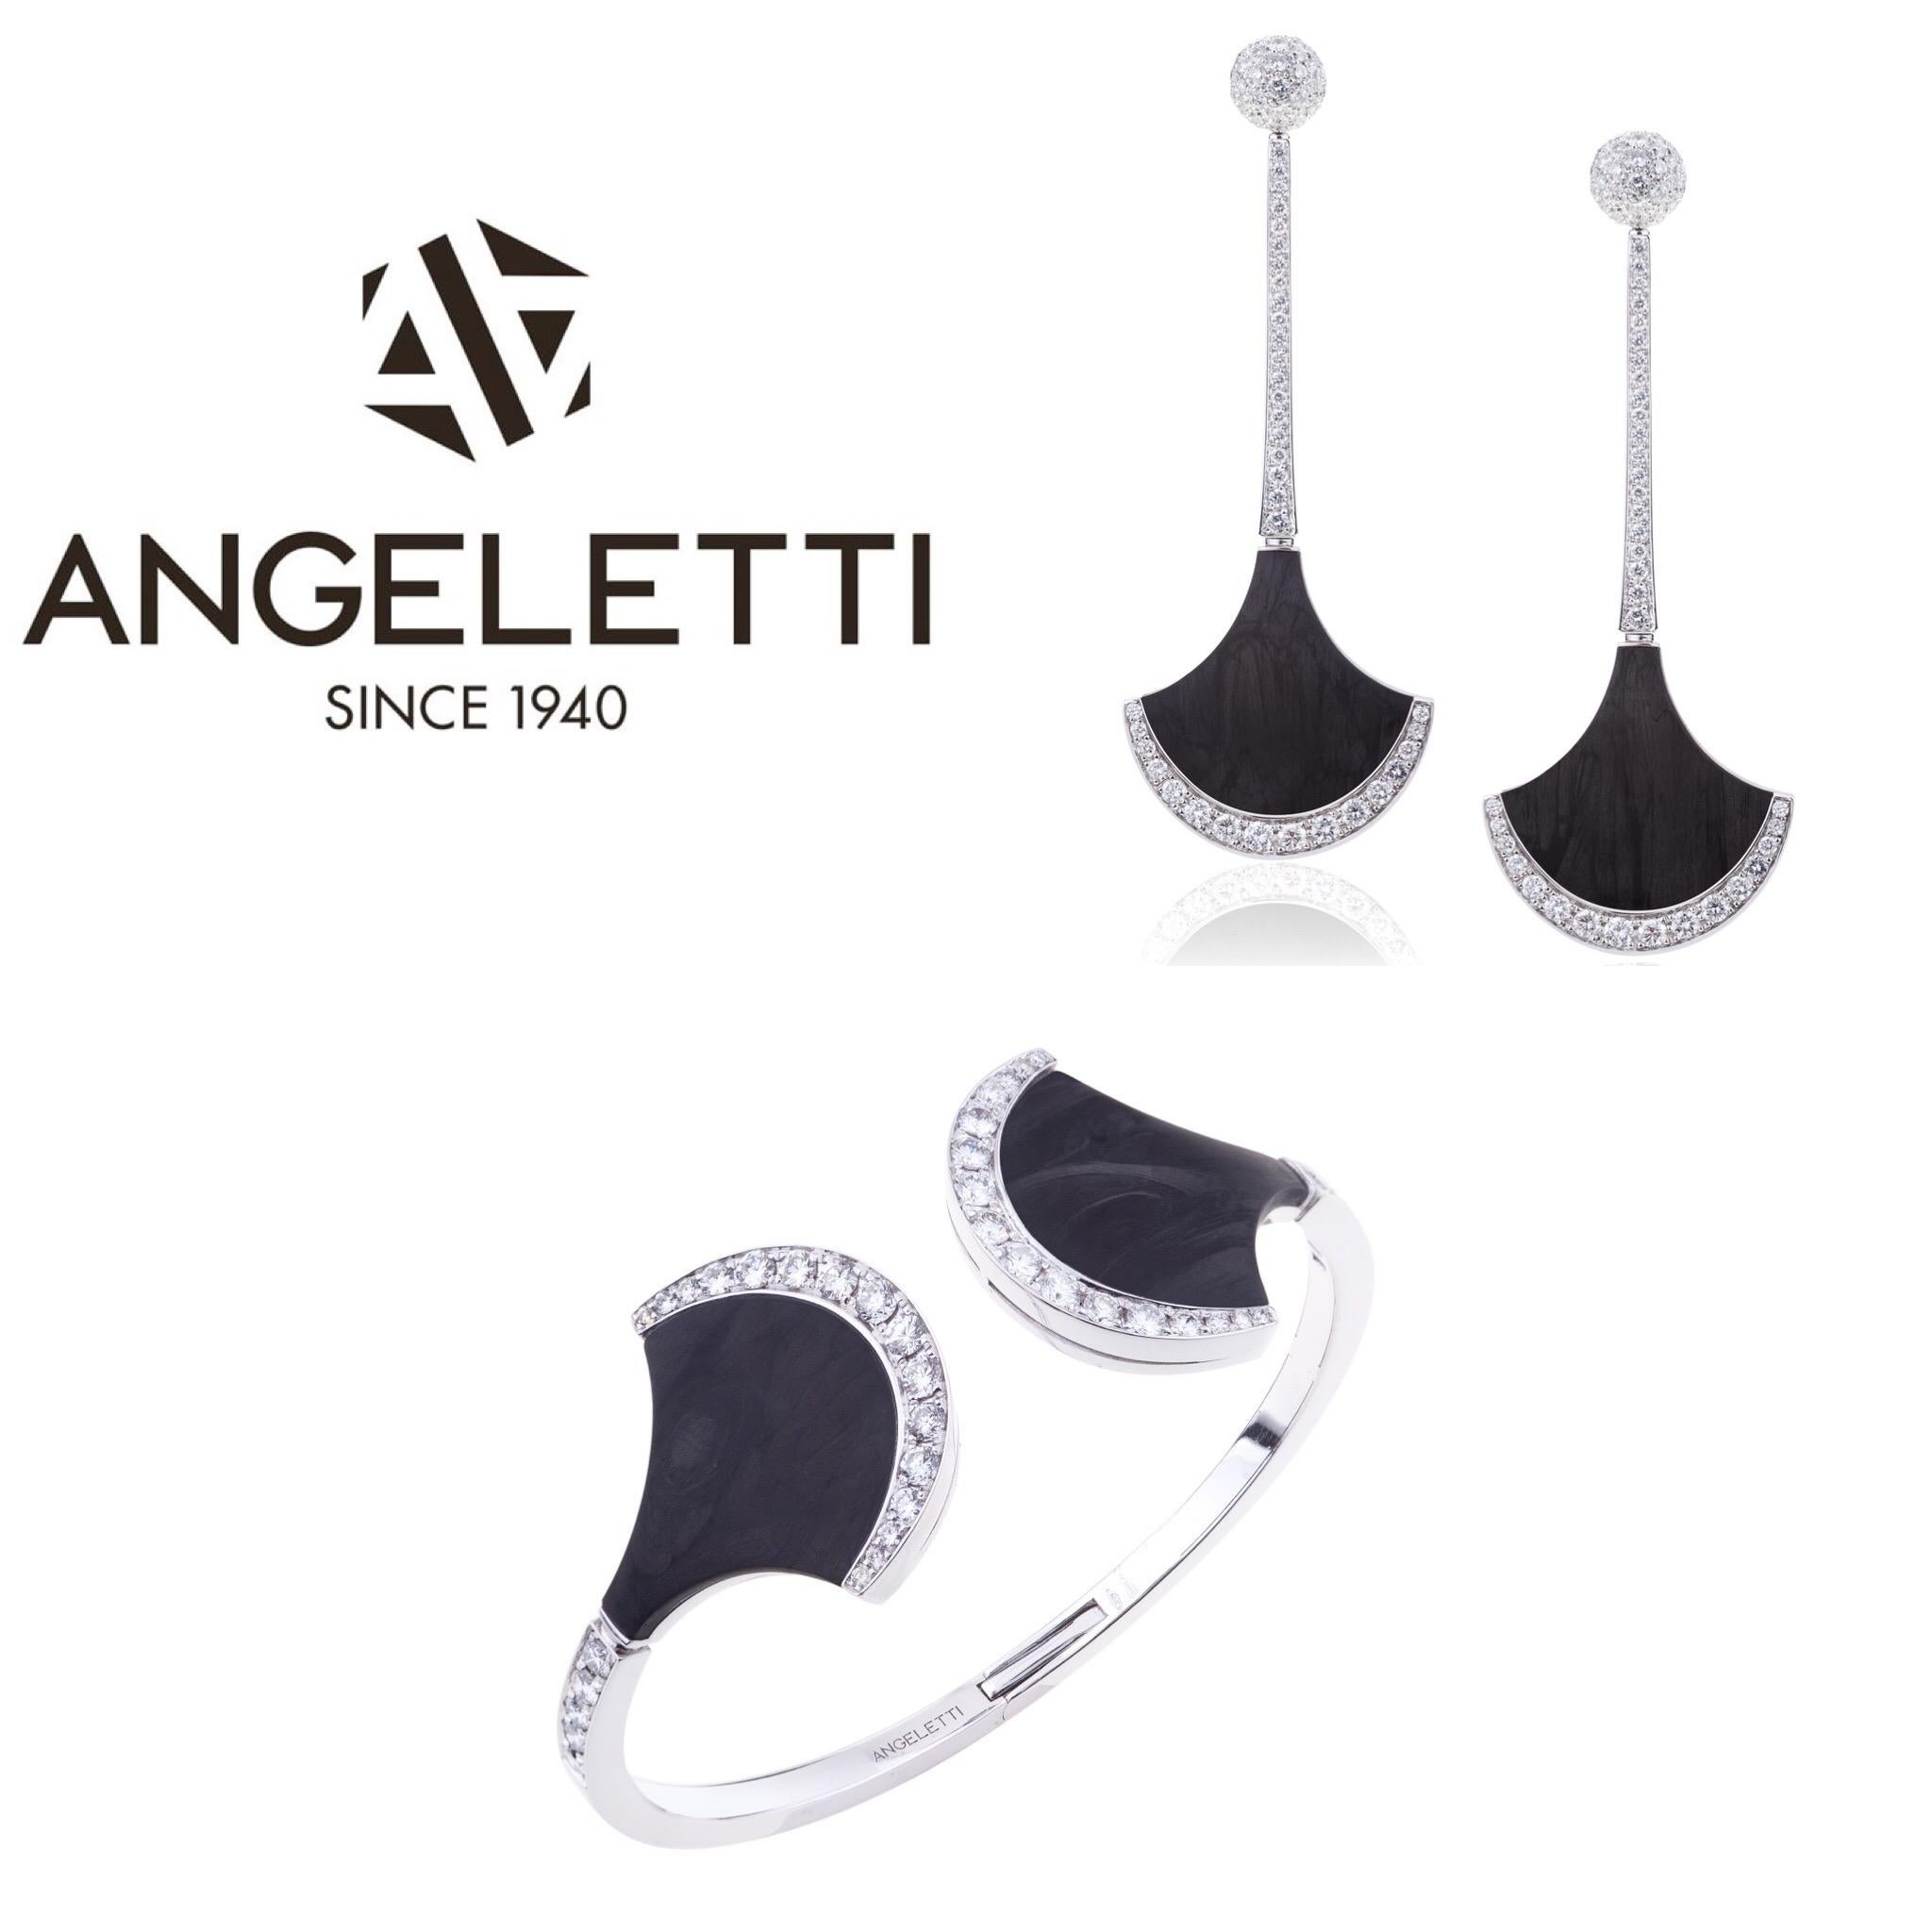 Exclusive Wave Collection by Angeletti White Gold Diamonds and Black Carbon Fiber Earrings.
The Use of New Materials is one of the Characteristic of the Endless Creative Streak of Angeletti. The Carbon Fiber set with diamonds give to these Earrings